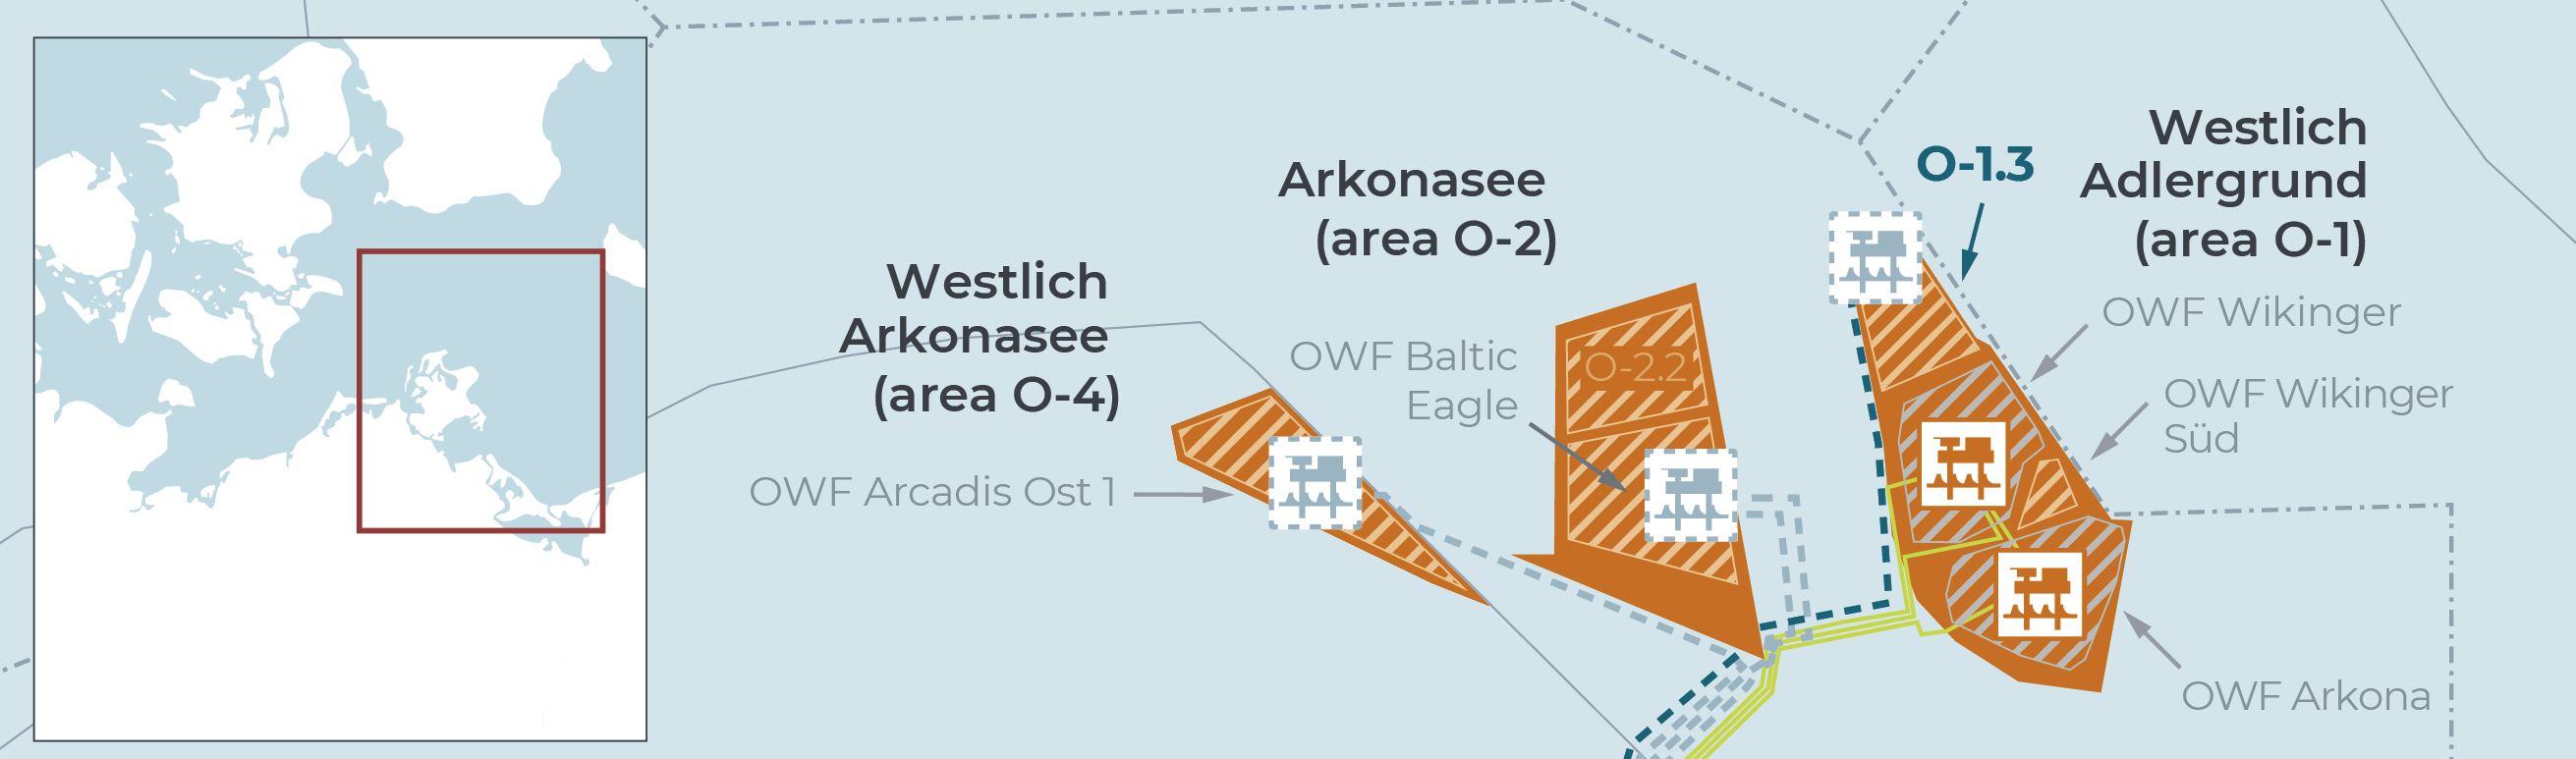 Wind farm areas and Ostwind offshore grid locations